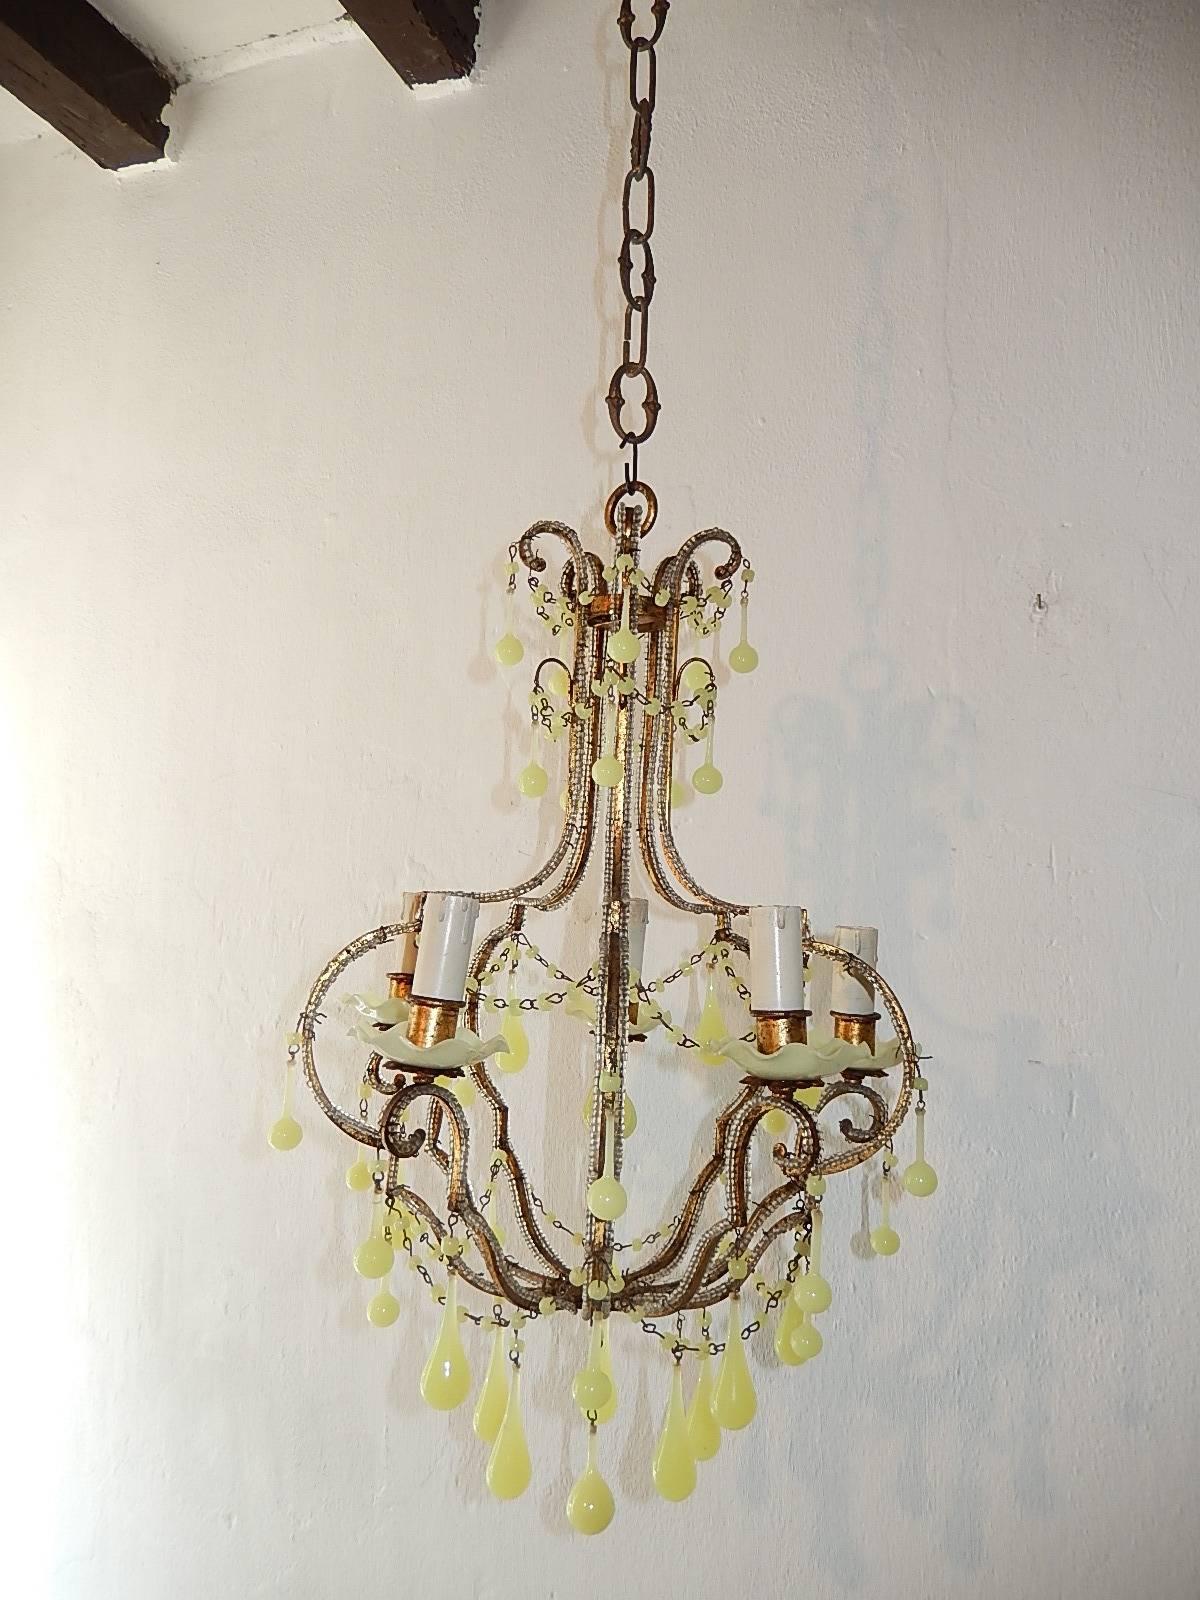 Housing five lights sitting in rare yellow ruffle opaline bobeches. Rewired and ready to hang. Double beading on gilt metal. Murano yellow opaline drops and beads throughout. Free priority shipping from Italy.